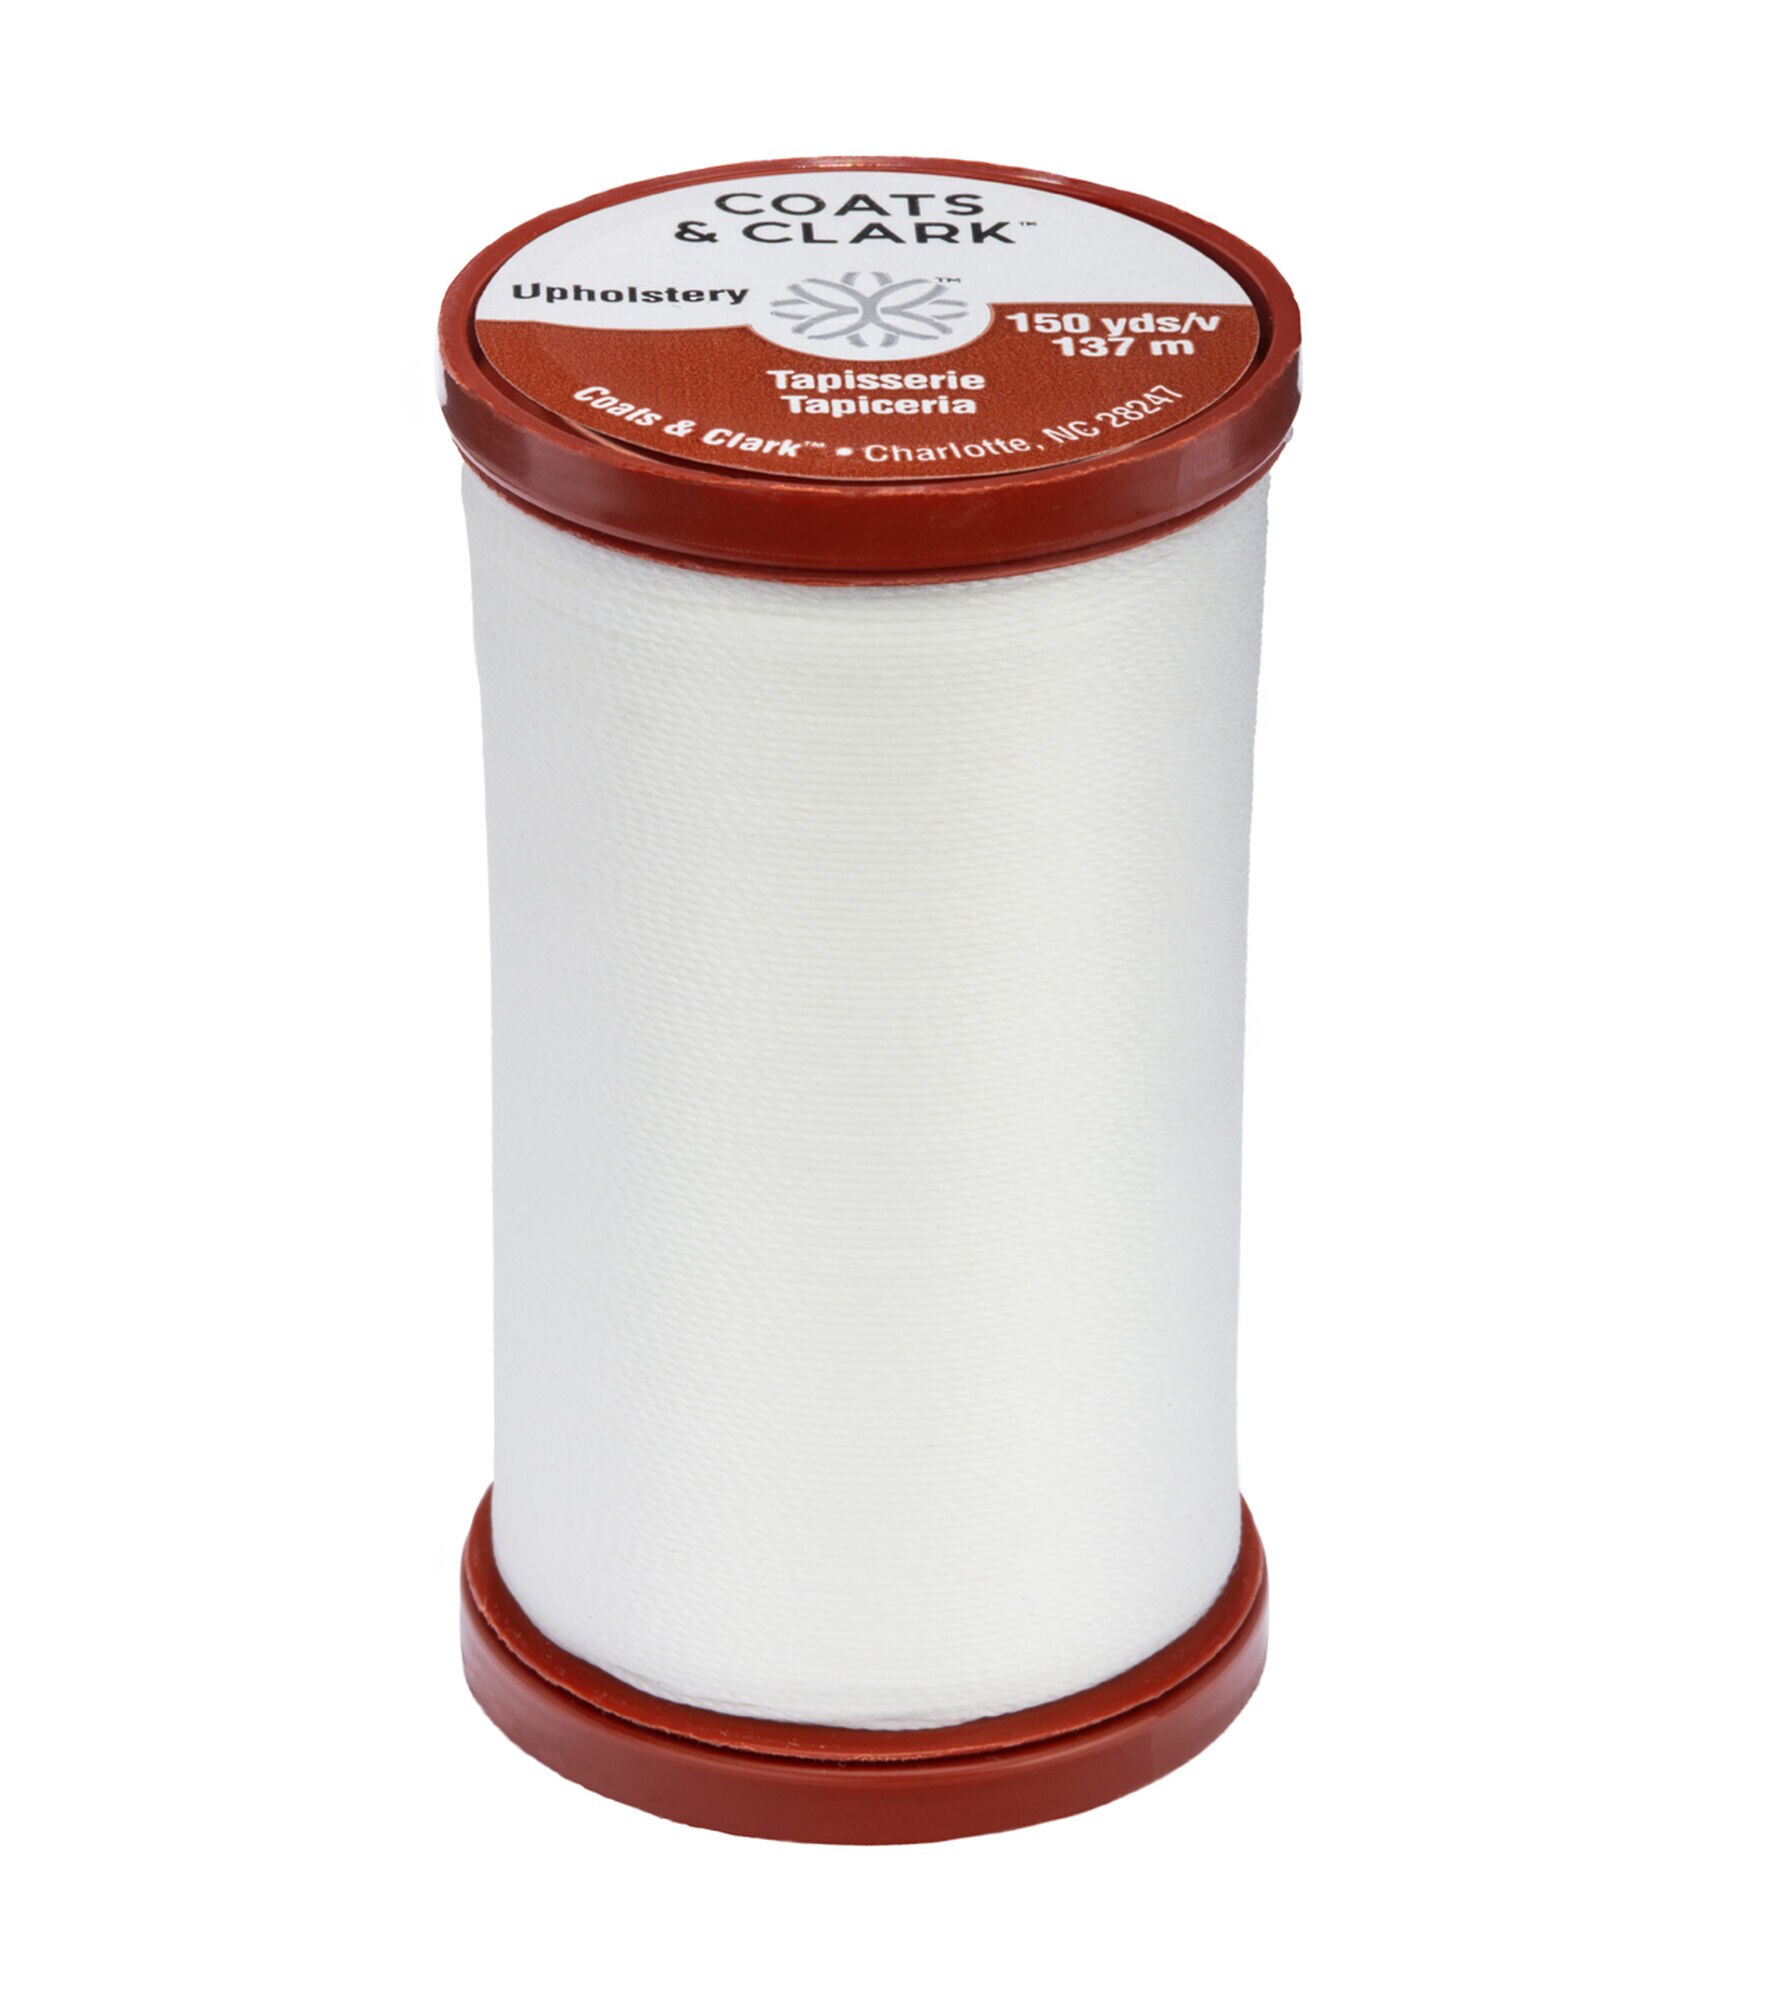 Coats & Clark Extra Strong & Upholstery Thread 150 yd, White, hi-res